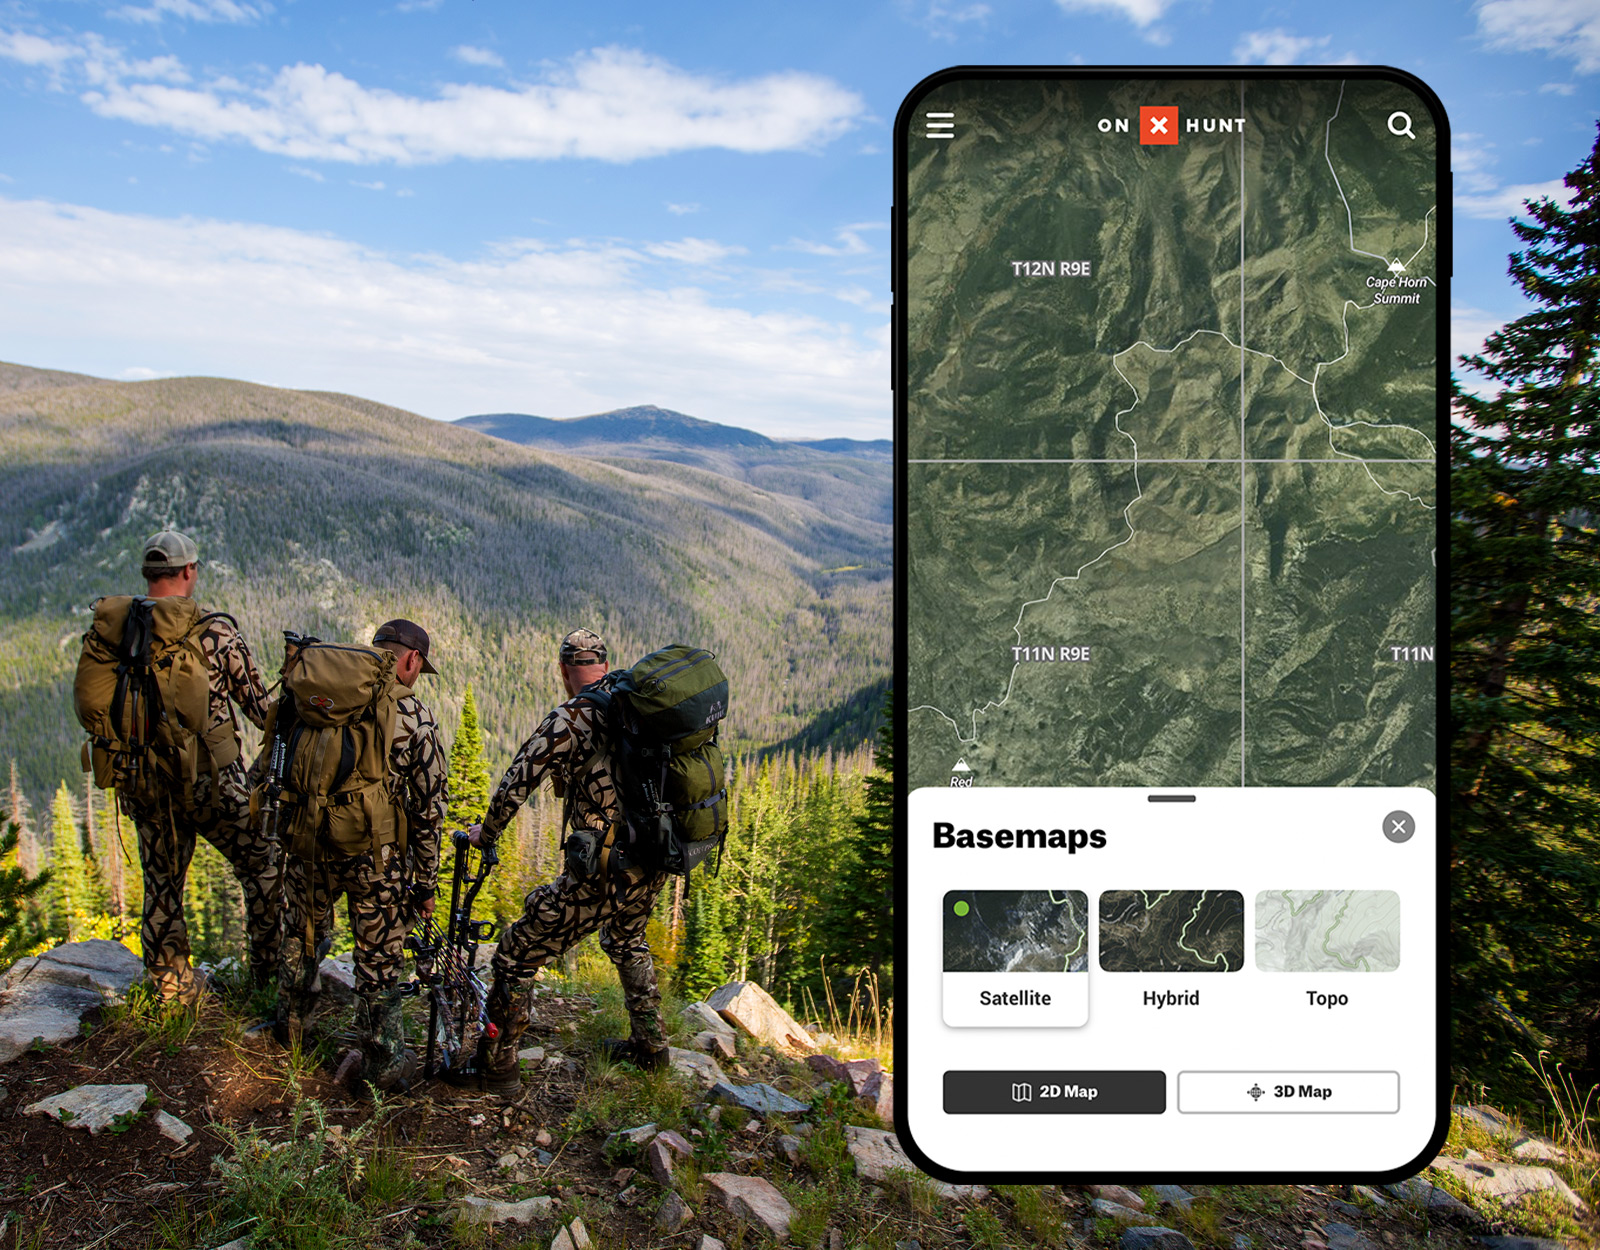 three male hunters stop while overlooking mountains. There is a view of the onX hunt app with the basemaps satellite view showing how the hunters use the app. 